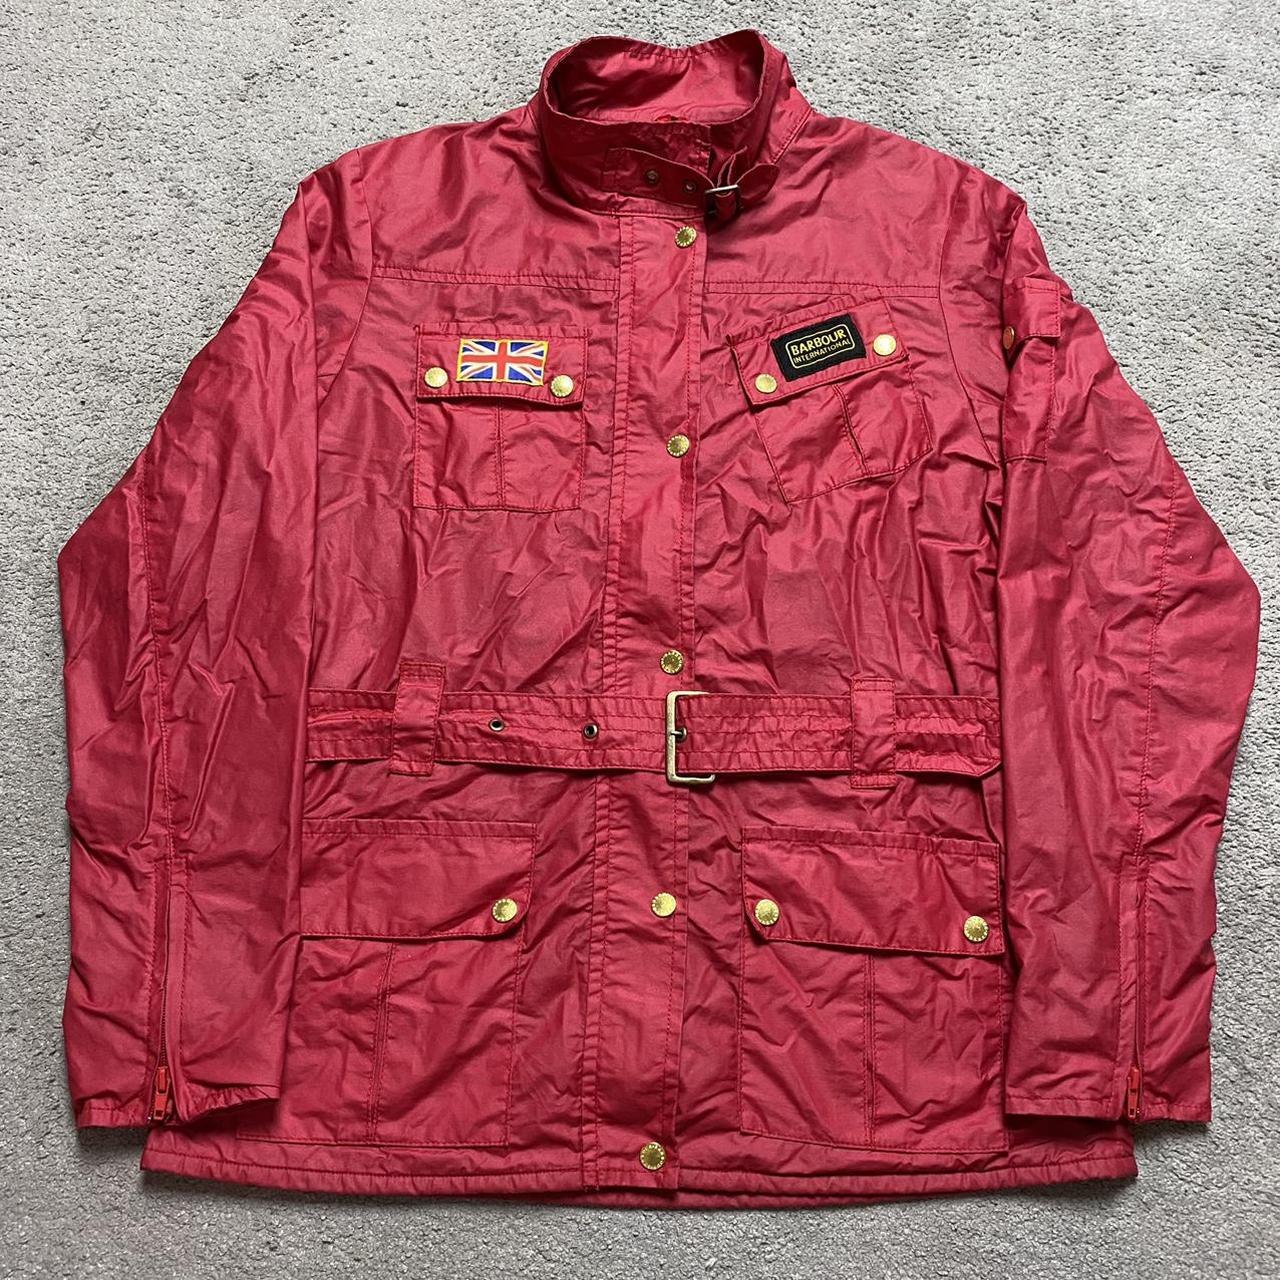 Product Image 1 - Women’s Barbour Union Jack red